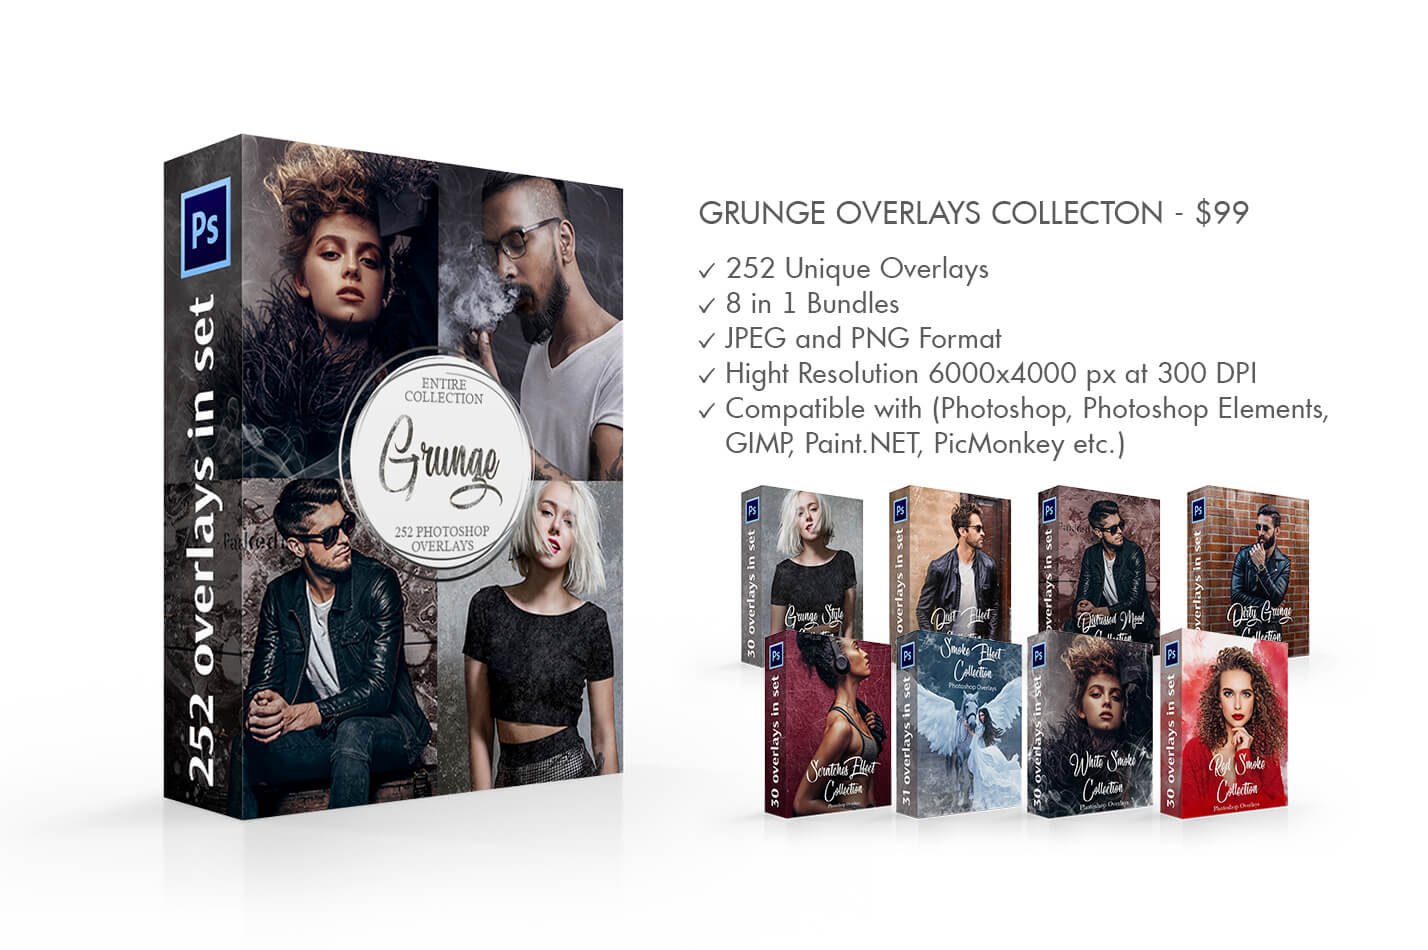 Grunge Overlays Collectionpreview image.